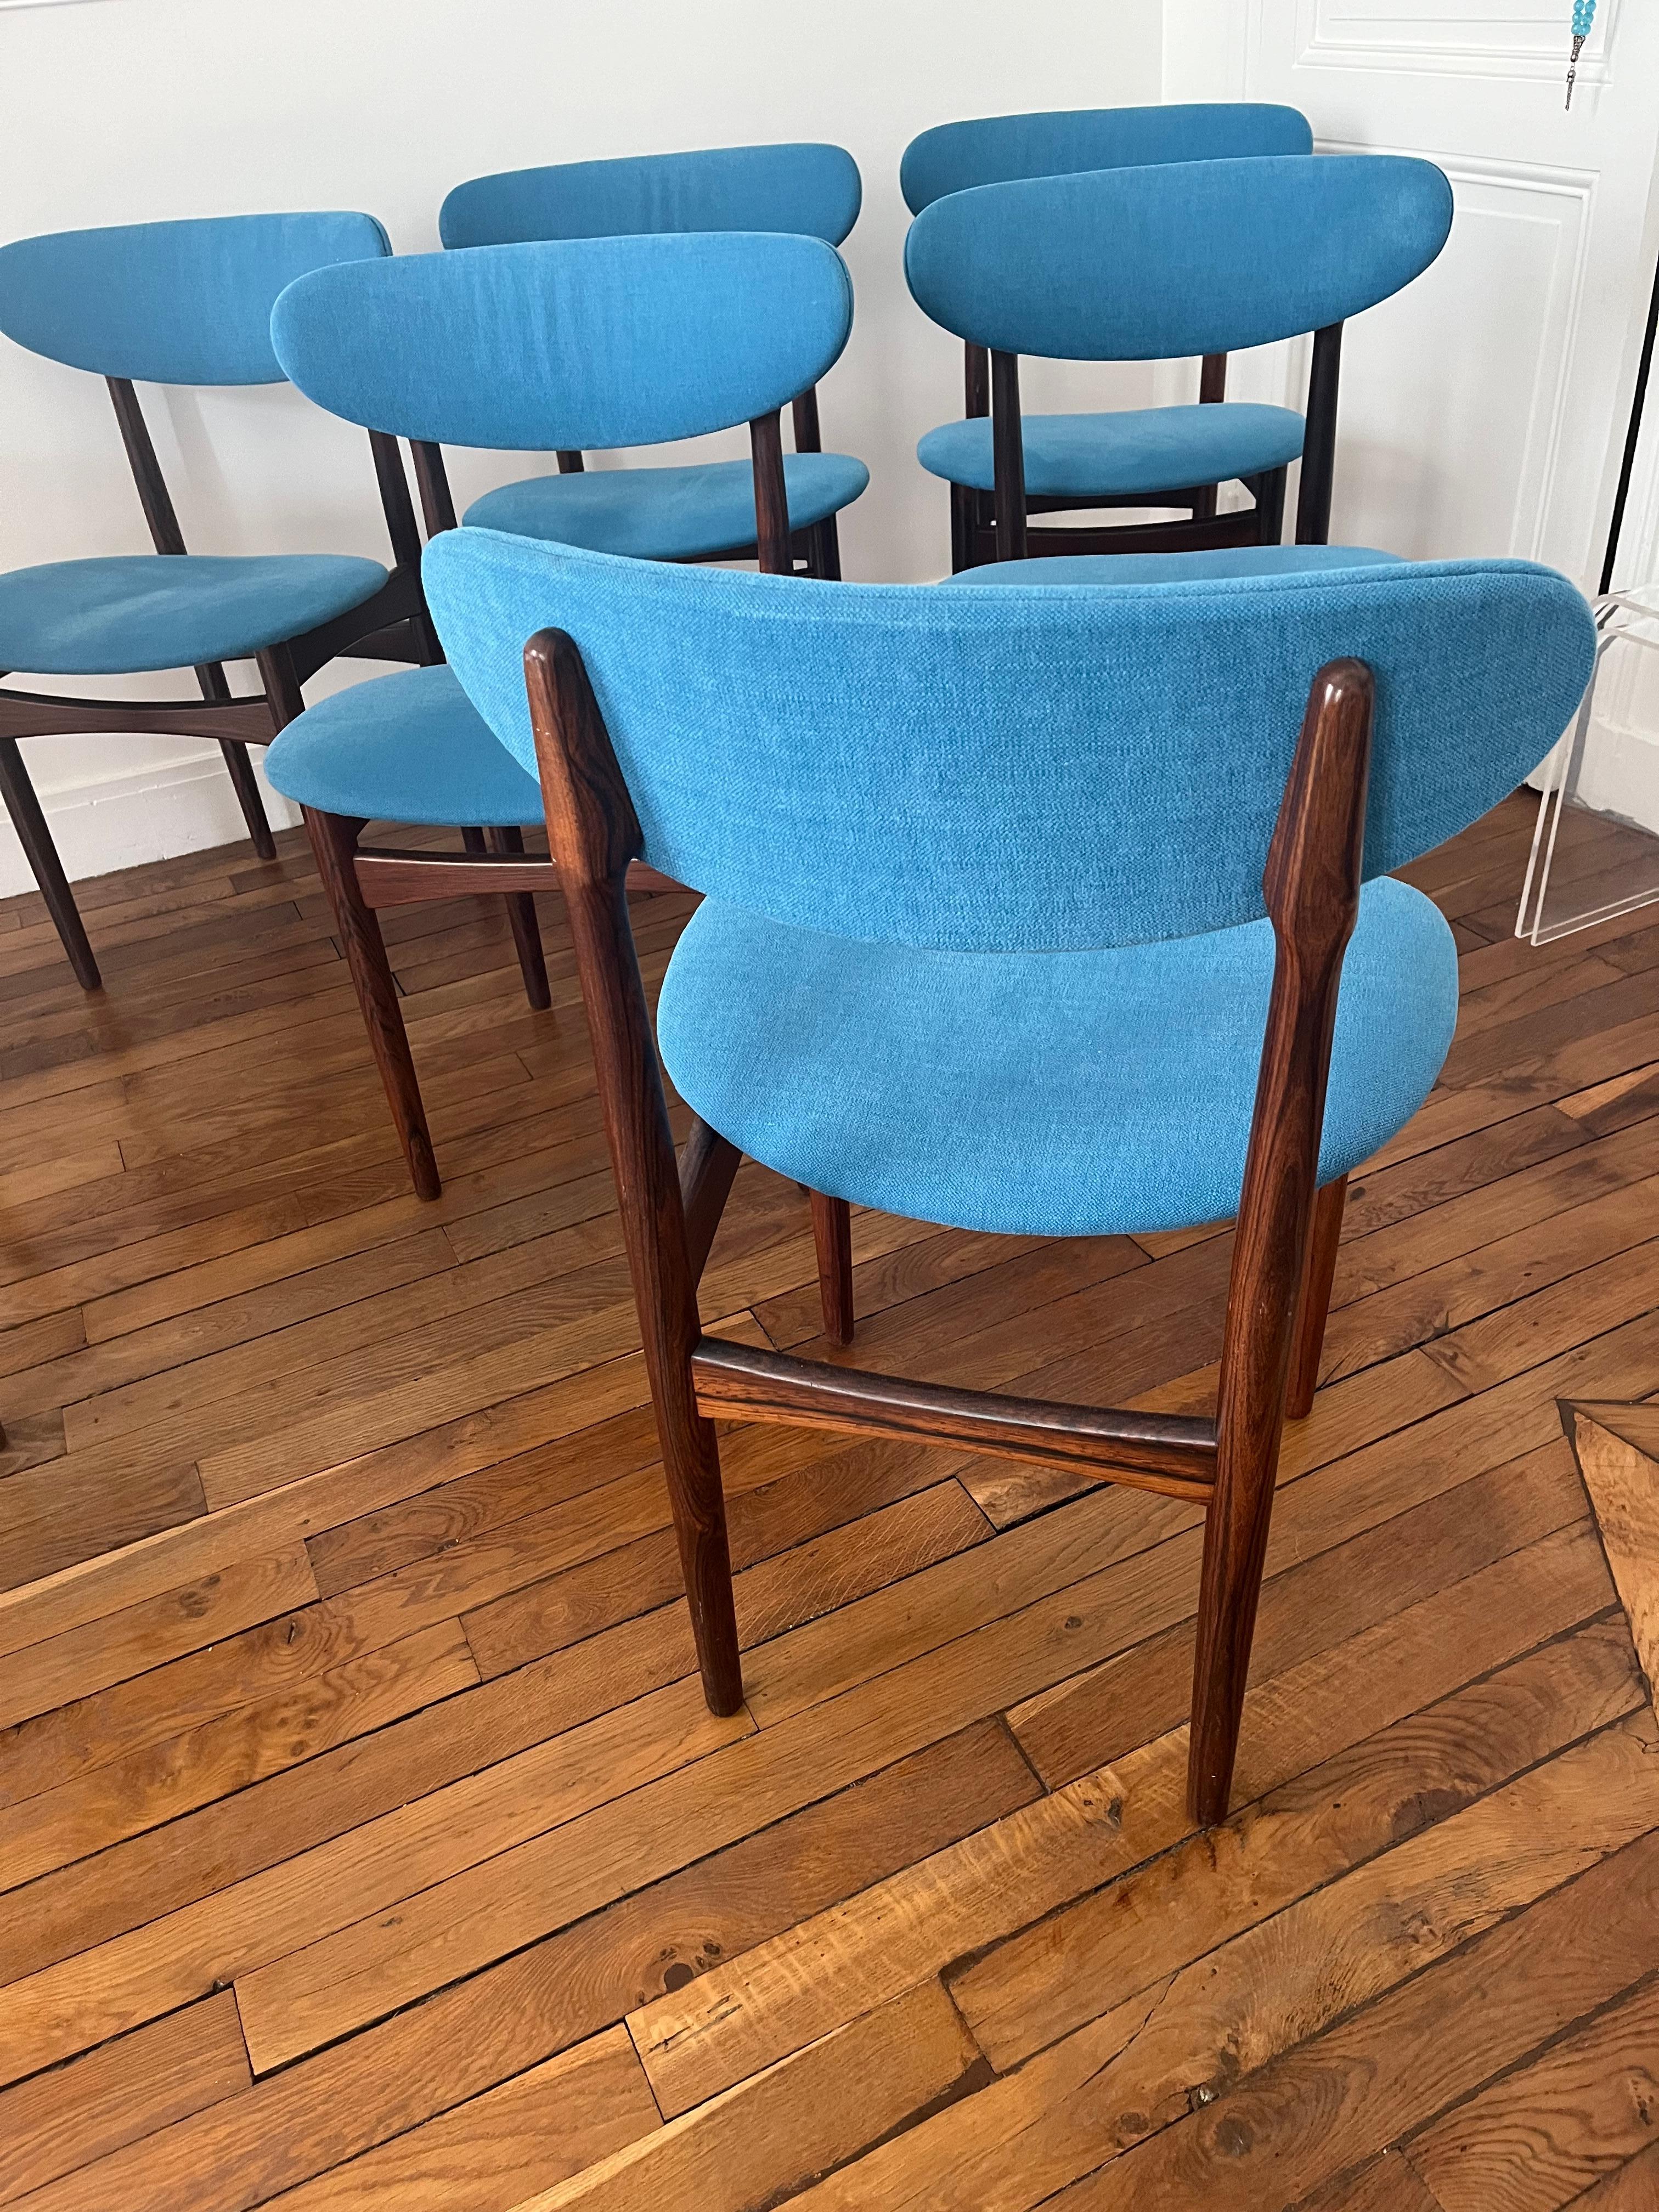 Late 20th Century Kofod Larsen  6 chairs  Rio rosewood and blue fabric Circa 1971 For Sale